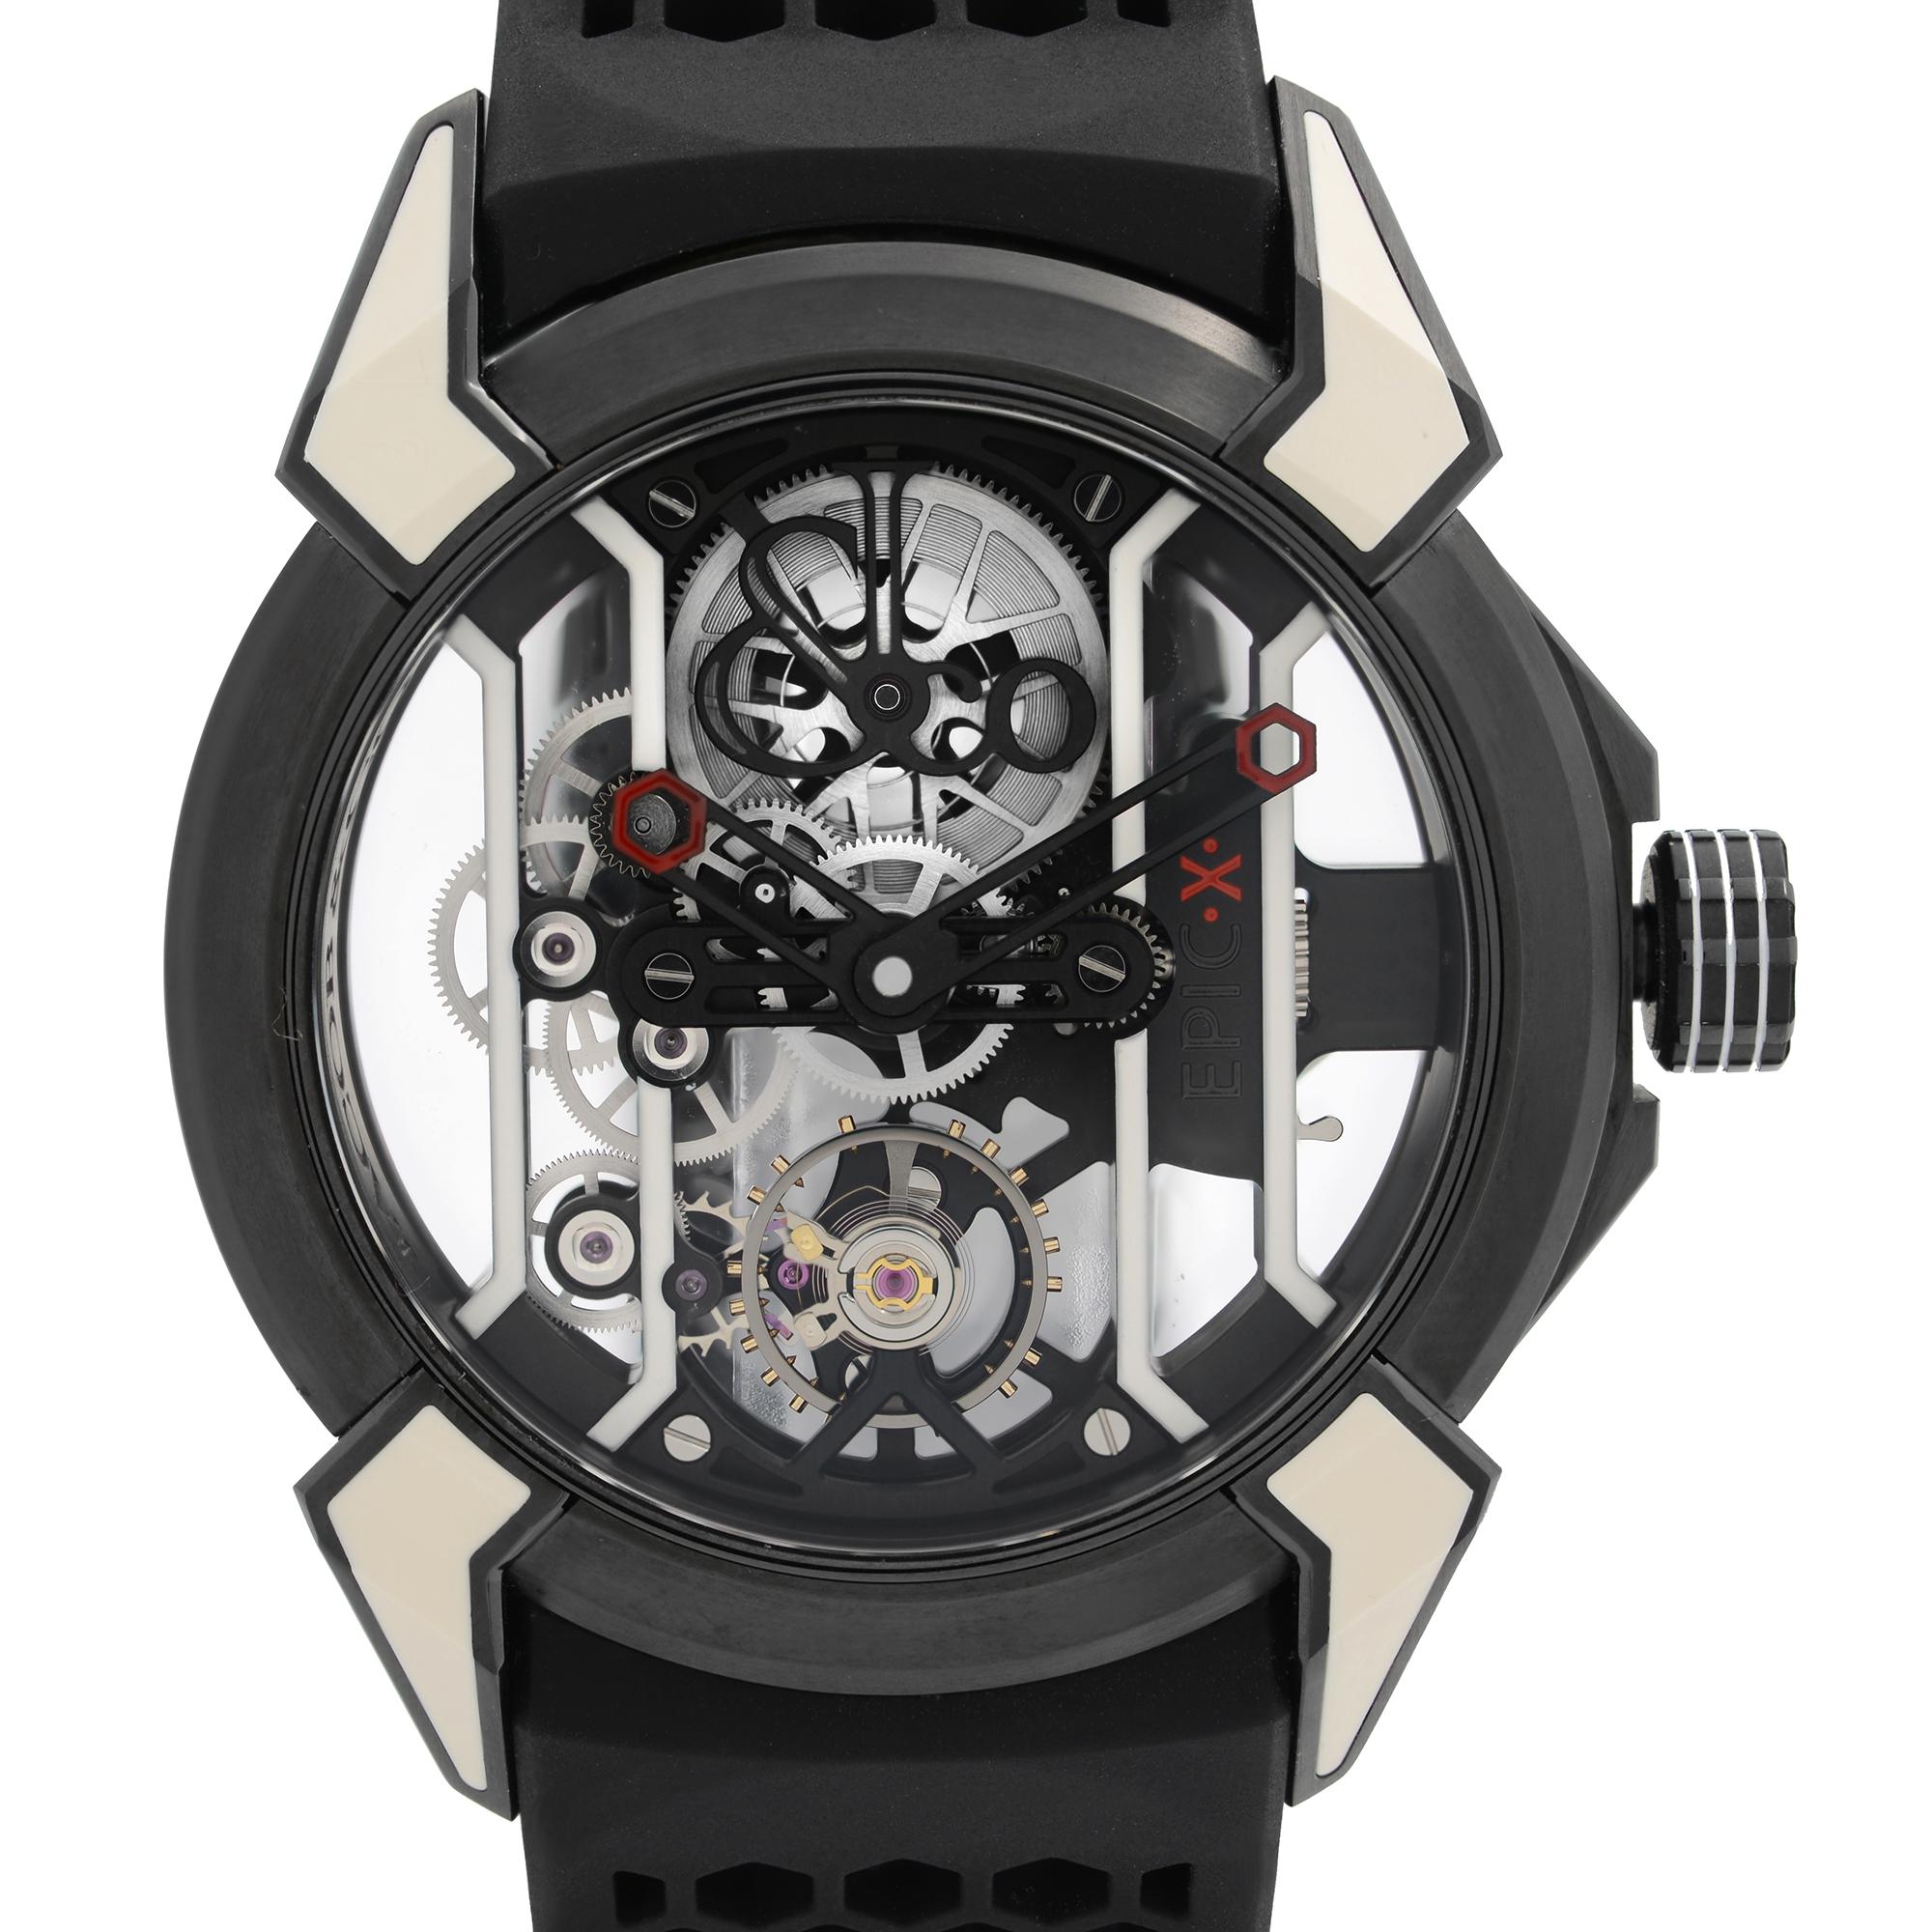 Unworn Jacob & Co. Epic X Racing Black Titanium Hand-Wind Mens Watch EX100.21.WR.PY.A. This Beautiful Timepiece is Powered by Mechanical Movement (Power Reserve: 48-Hours; Frequency: 28’800 vib/h). Features: Black DLC Coated and White Neoralithe